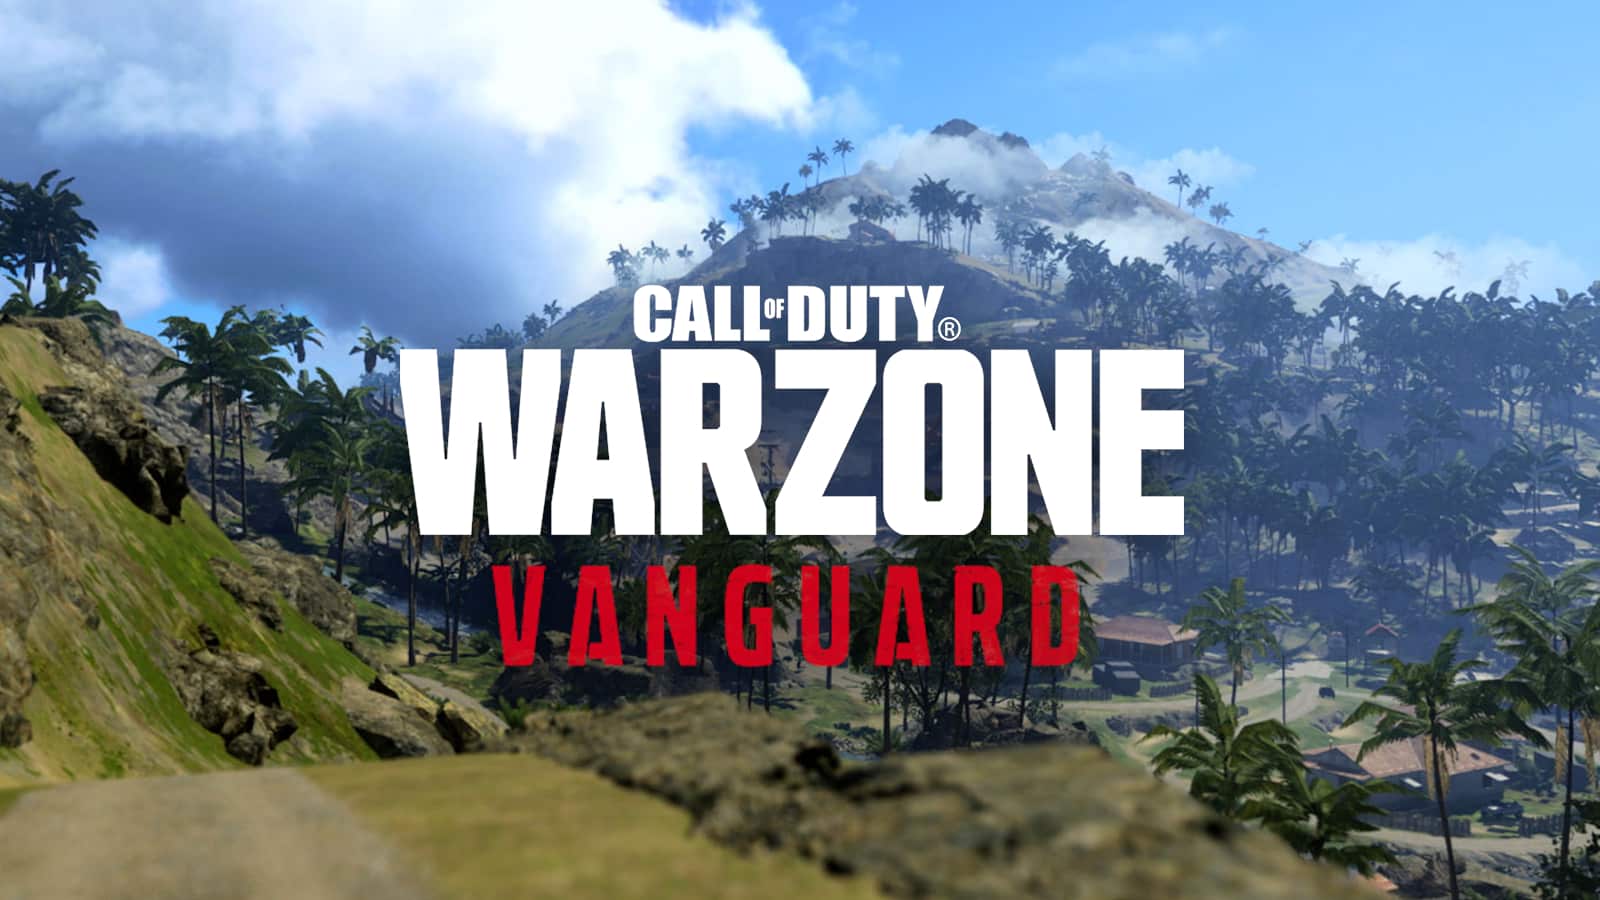 call of duty warzone new map vanguard reveal teaser